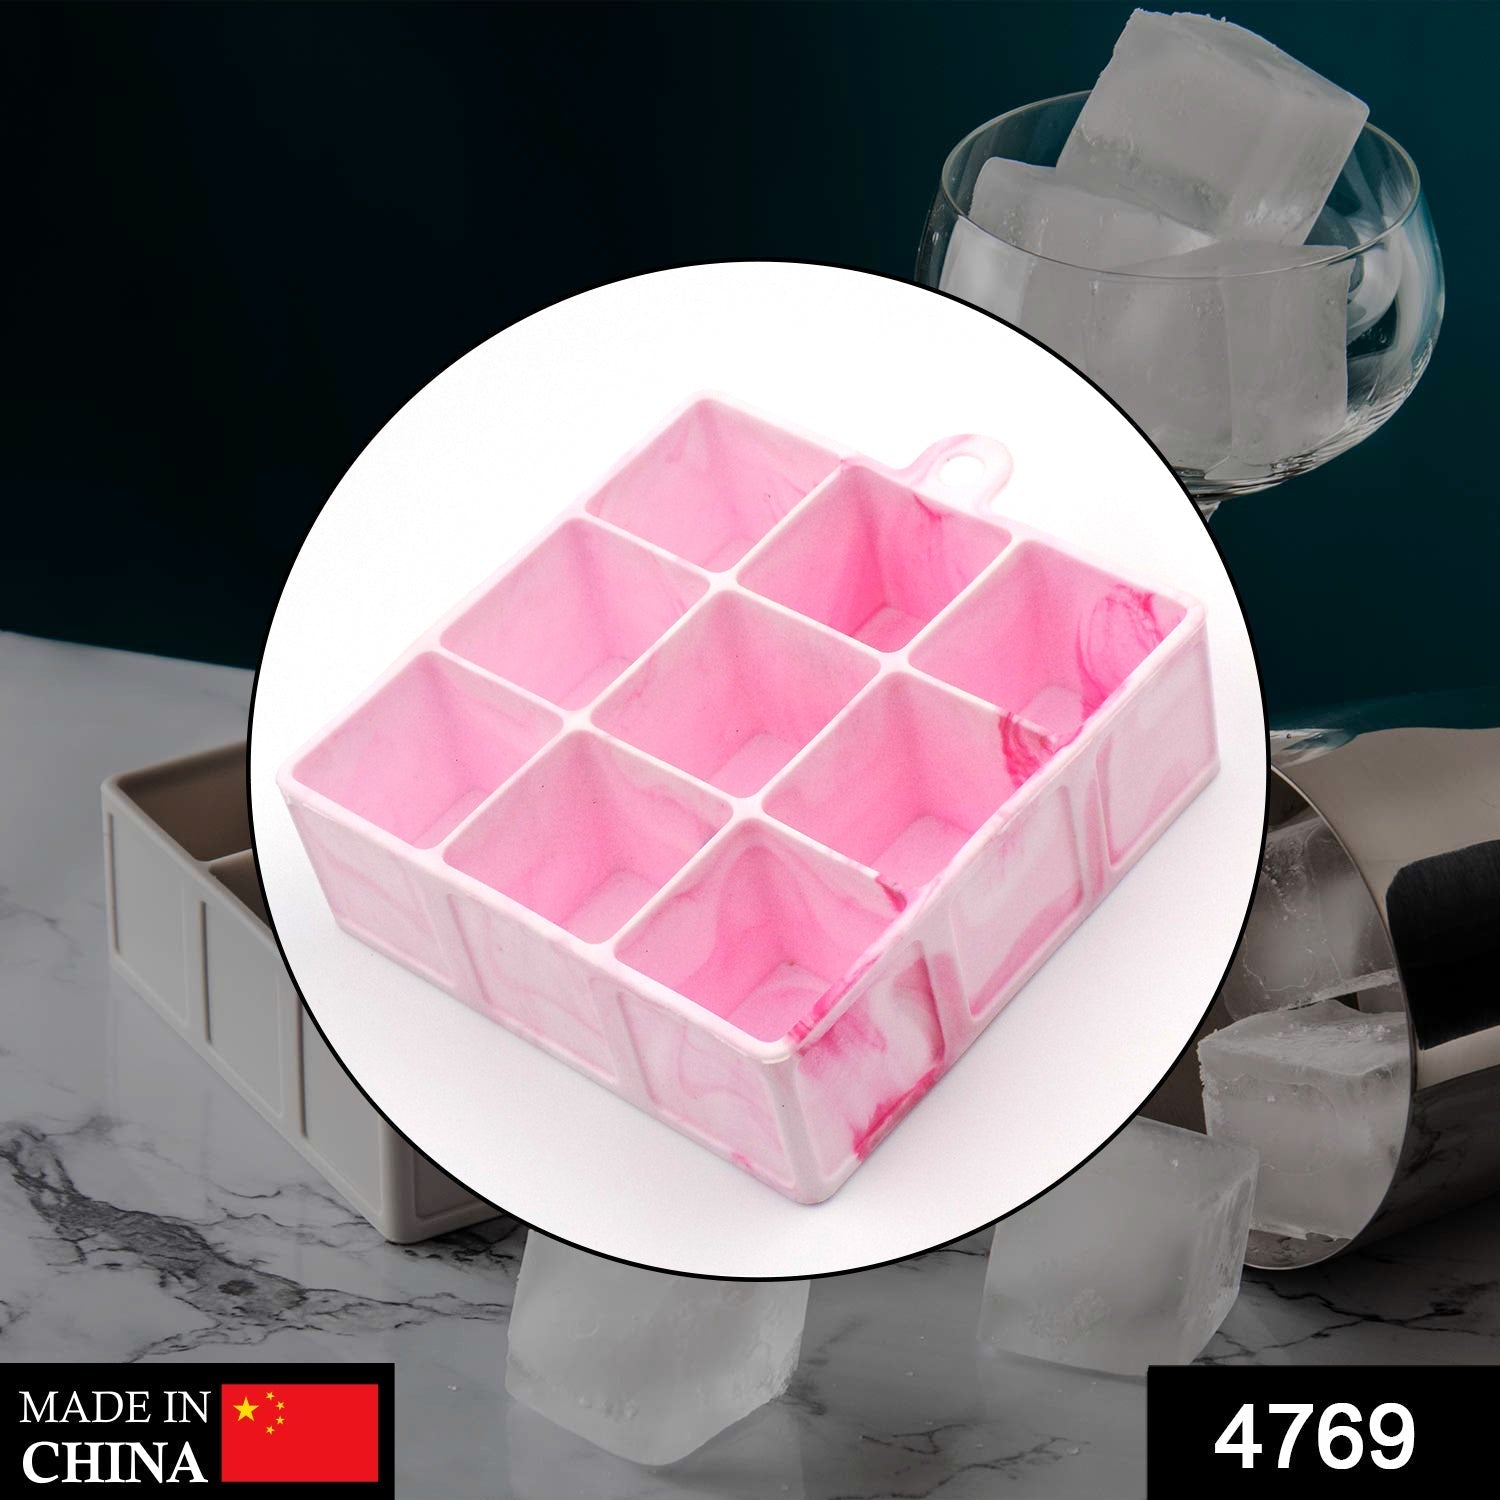 4769 Silicone 9 Cavity Ice Tray and cavity ice tool Used for storing and freezing various types of ice cubes.